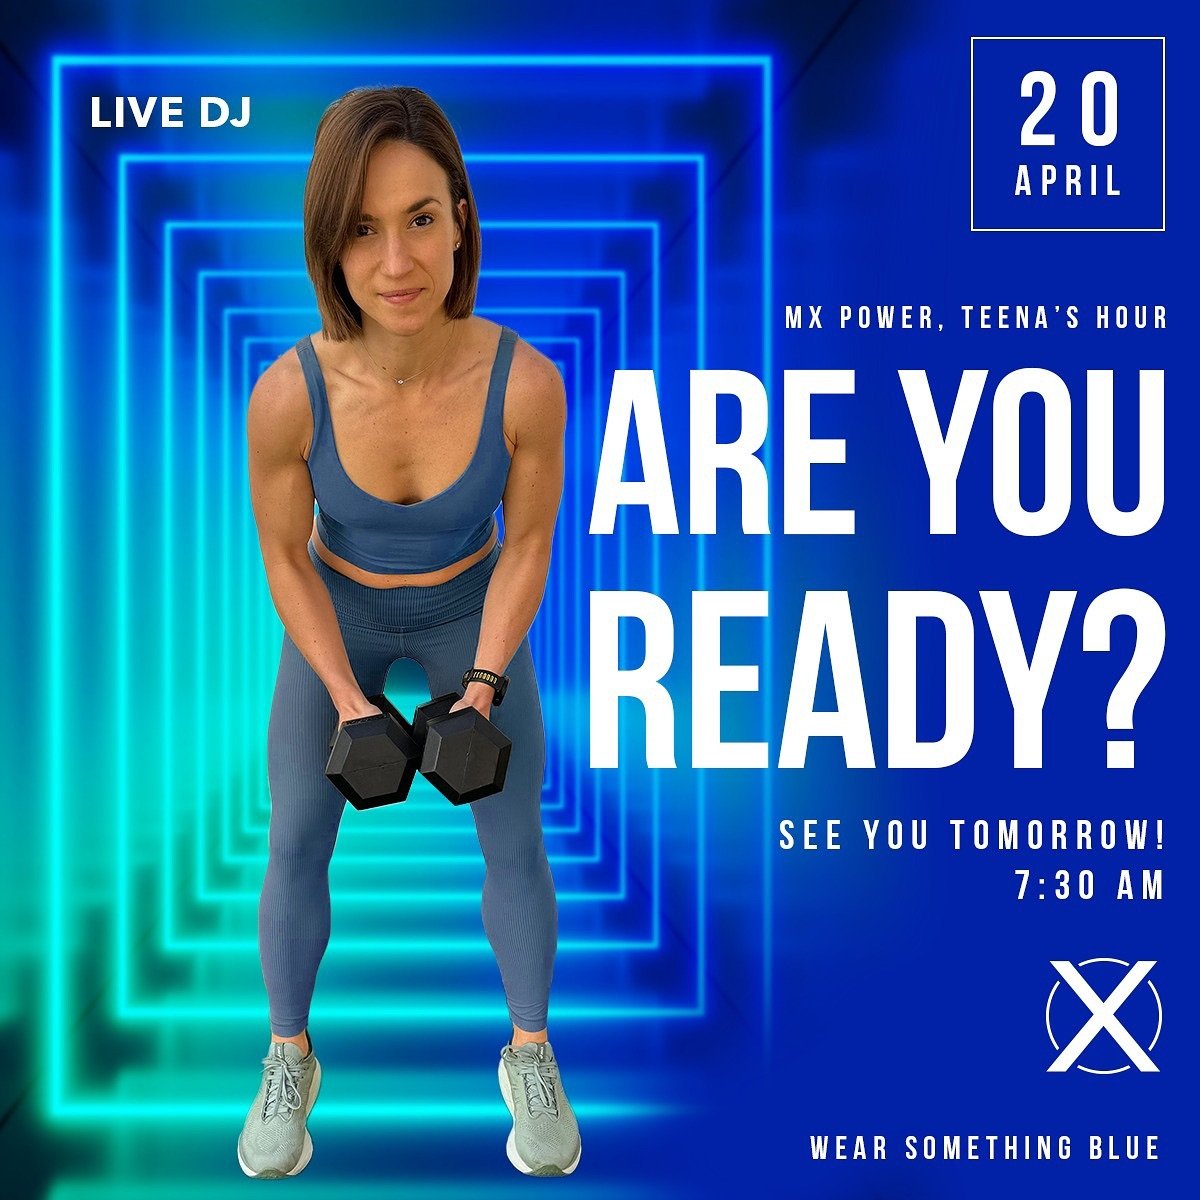 🌟REMINDER: Just one more sleep until MX Power, Teena&rsquo;s Hour! Who&rsquo;s excited? 
Can&rsquo;t wait to see you all tomorrow morning! Set those alarms and get ready to sweat it out! 💪

&bull;Date: April 20, 2024
&bull;Time: 7:30 am
&bull;Live 